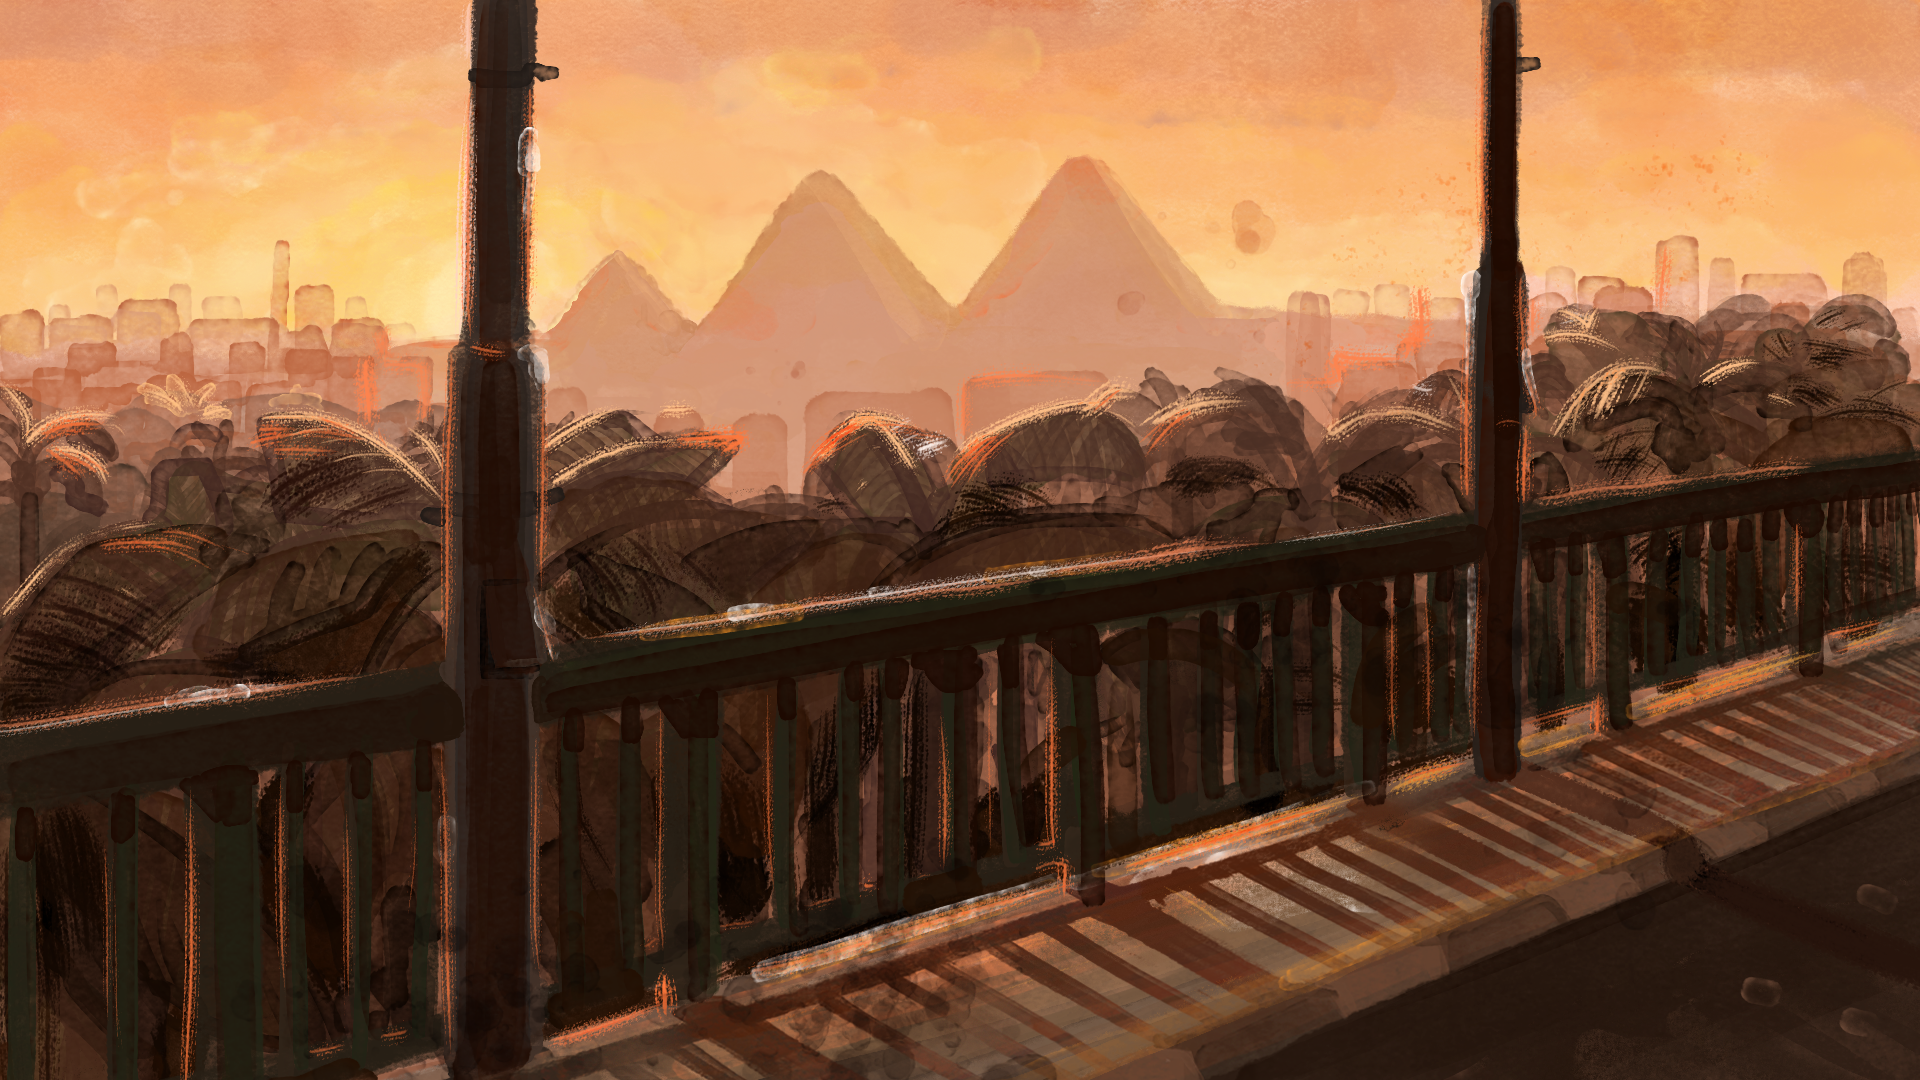 Illustrated view from a bridge in Cairo. It is summer and there are palm trees in the foreground and pyramids in the background.